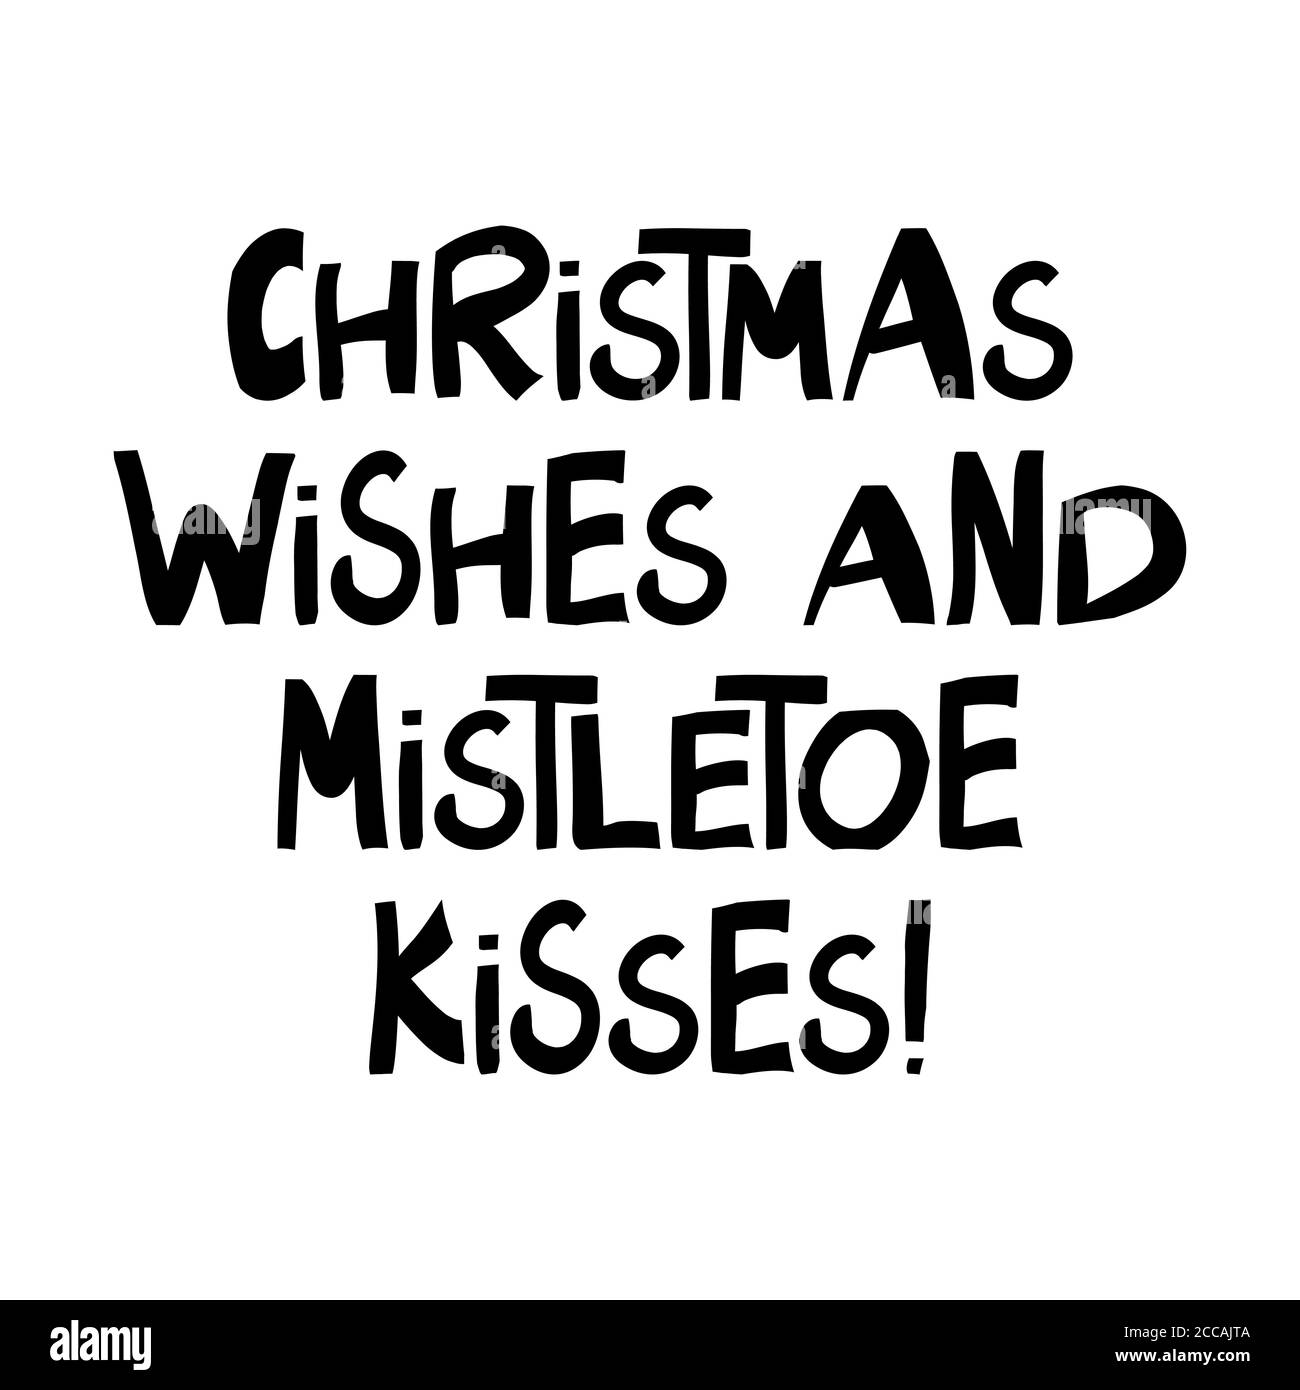 Christmas wishes and mistletoe kisses. Winter holidays quote. Cute hand drawn lettering in modern scandinavian style. Isolated on white background Stock Vector